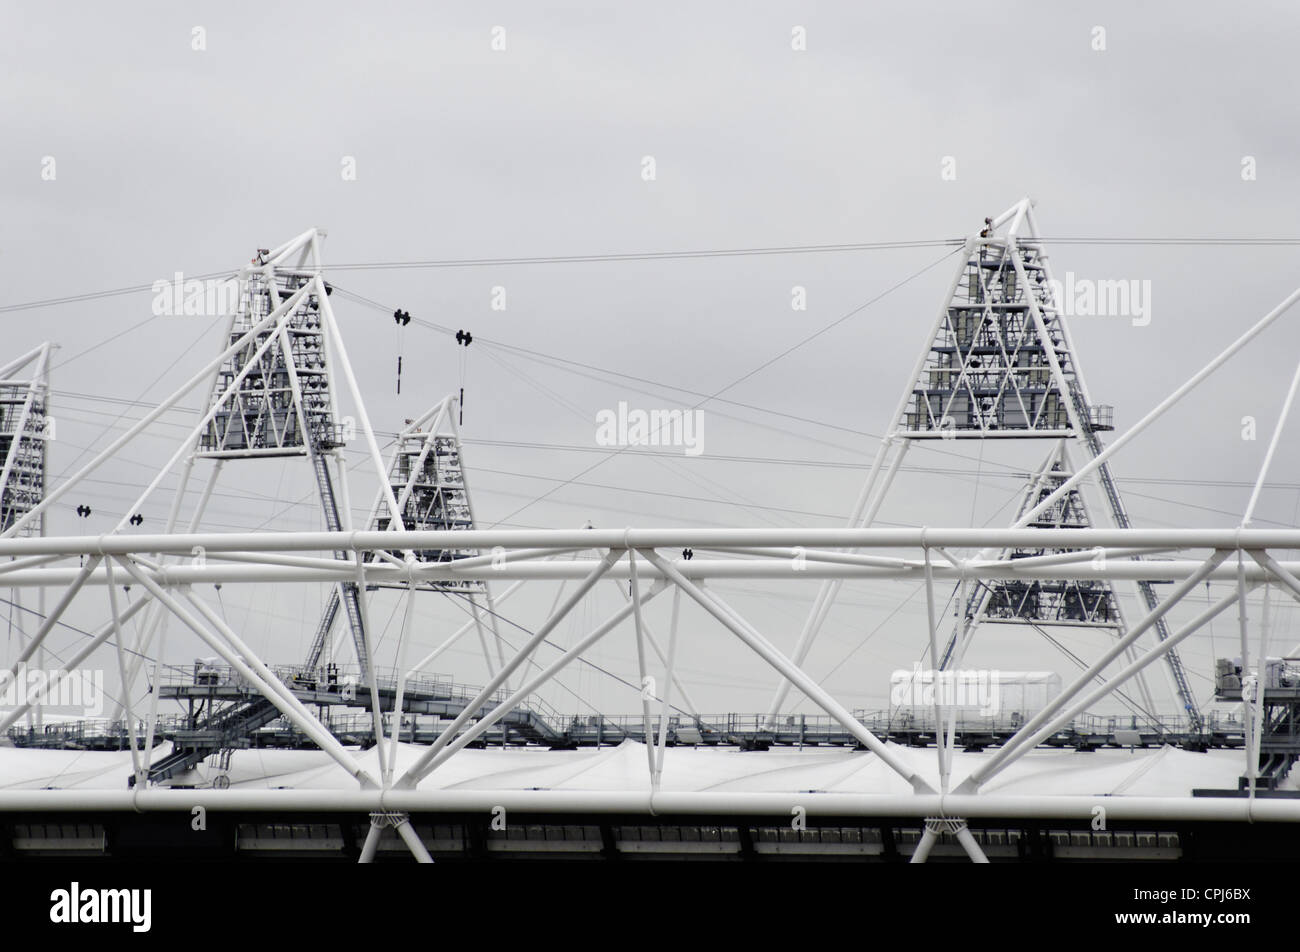 LONDON, UK - MAY 14: The London 2012 Olympic Park under construction on May 14, 2012 in Stratford, London. Stock Photo